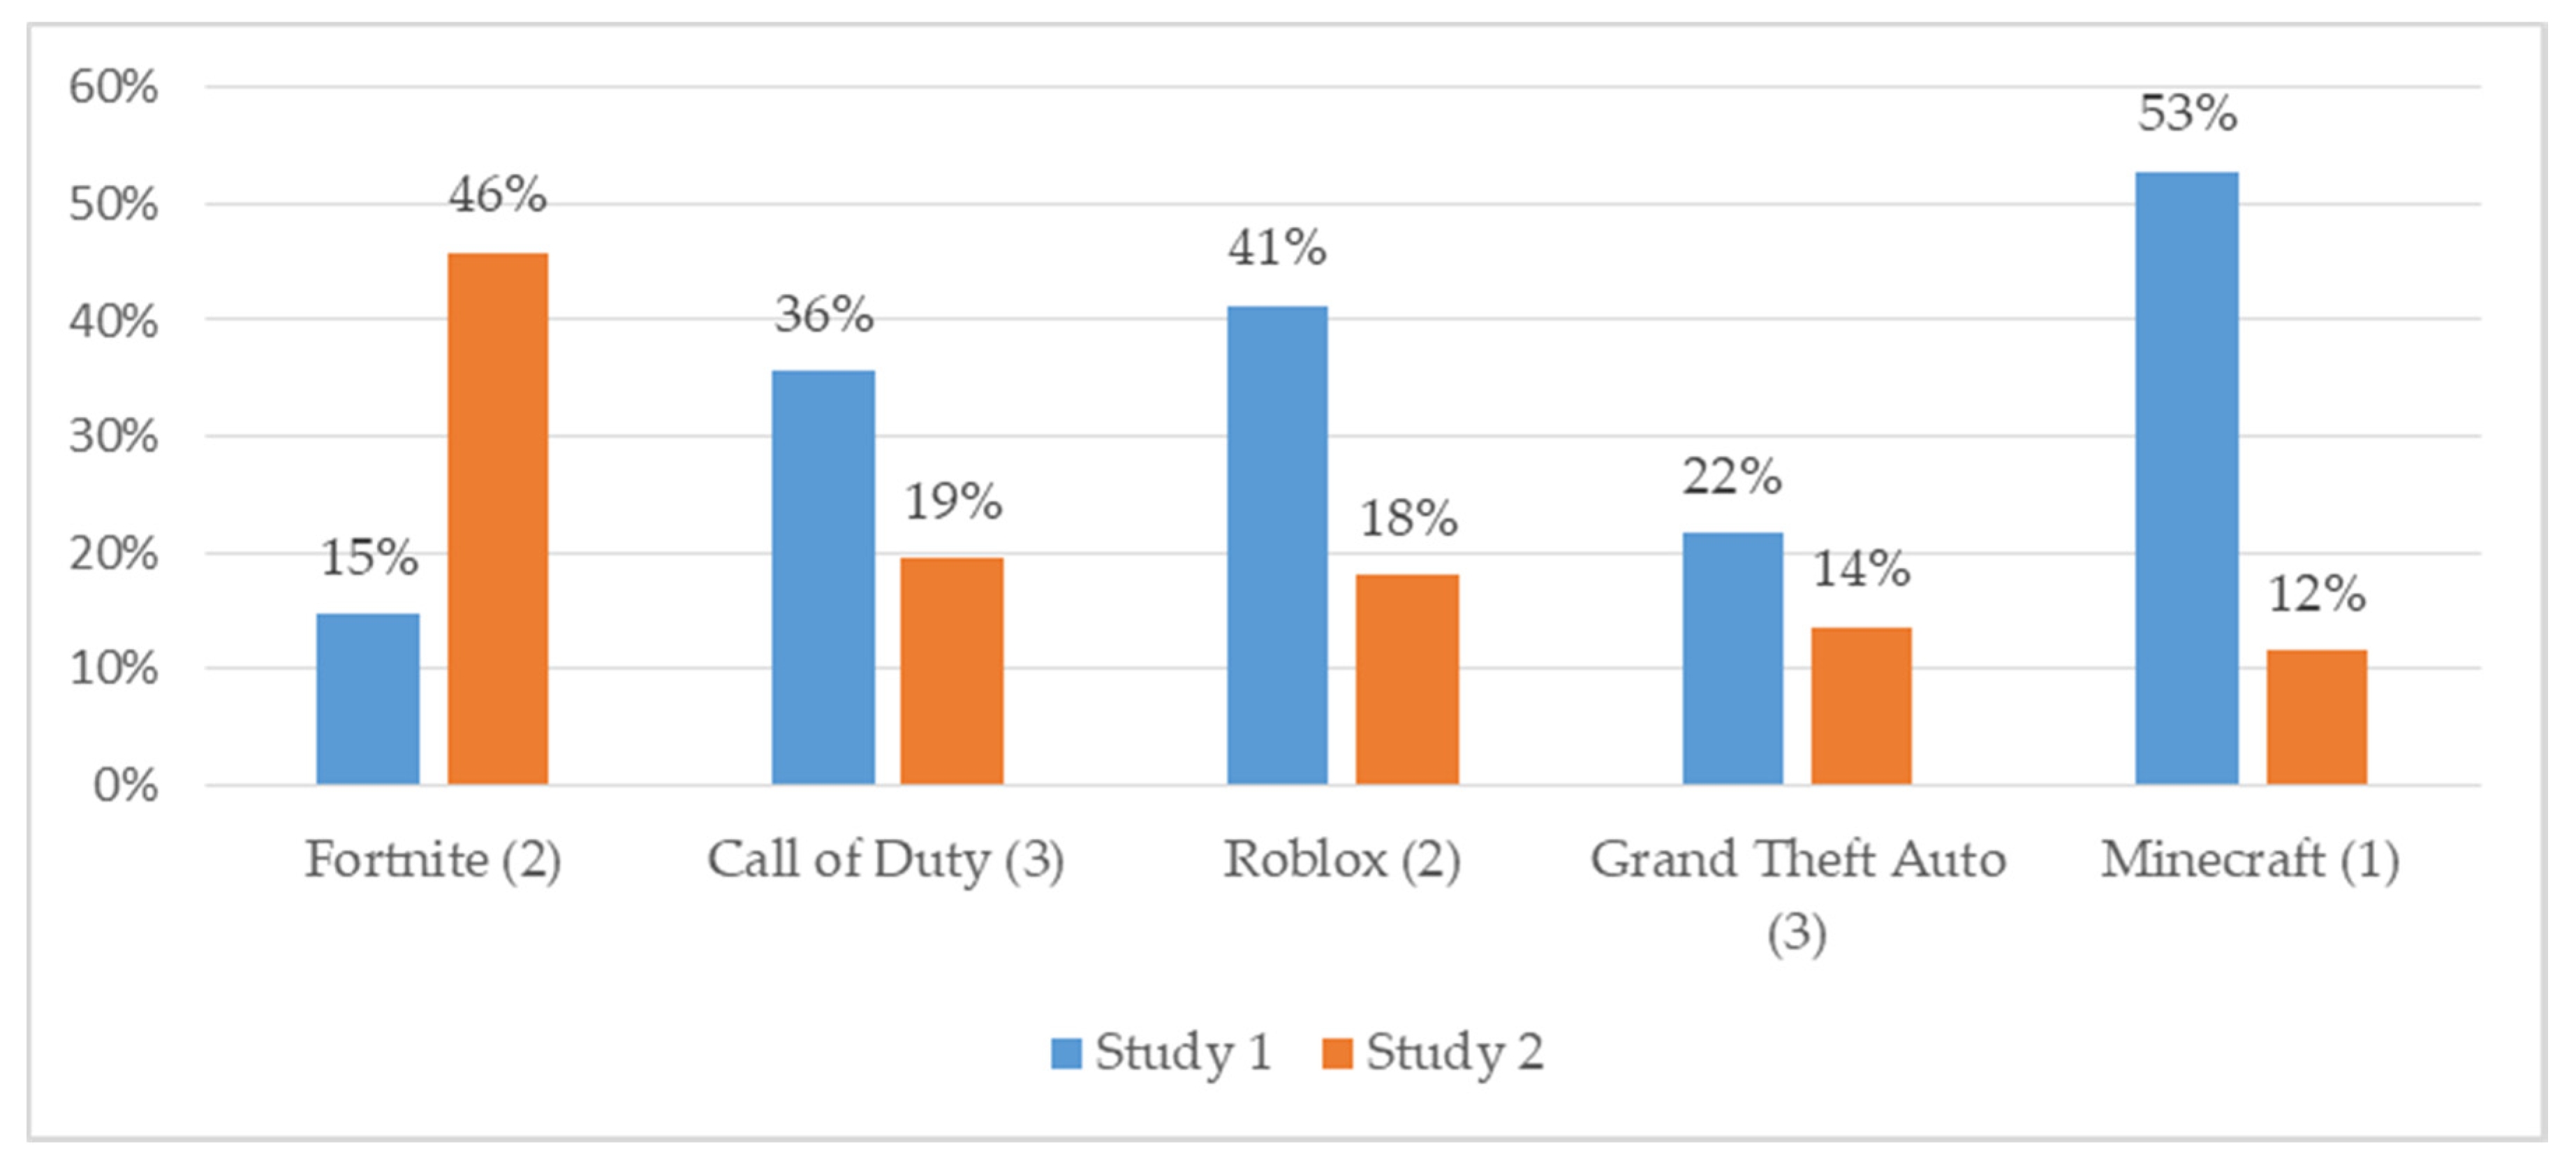 Ijerph Free Full Text Social And Behavioral Health Factors Associated With Violent And Mature Gaming In Early Adolescence Html - roblox logo evolution 2004 to 2019